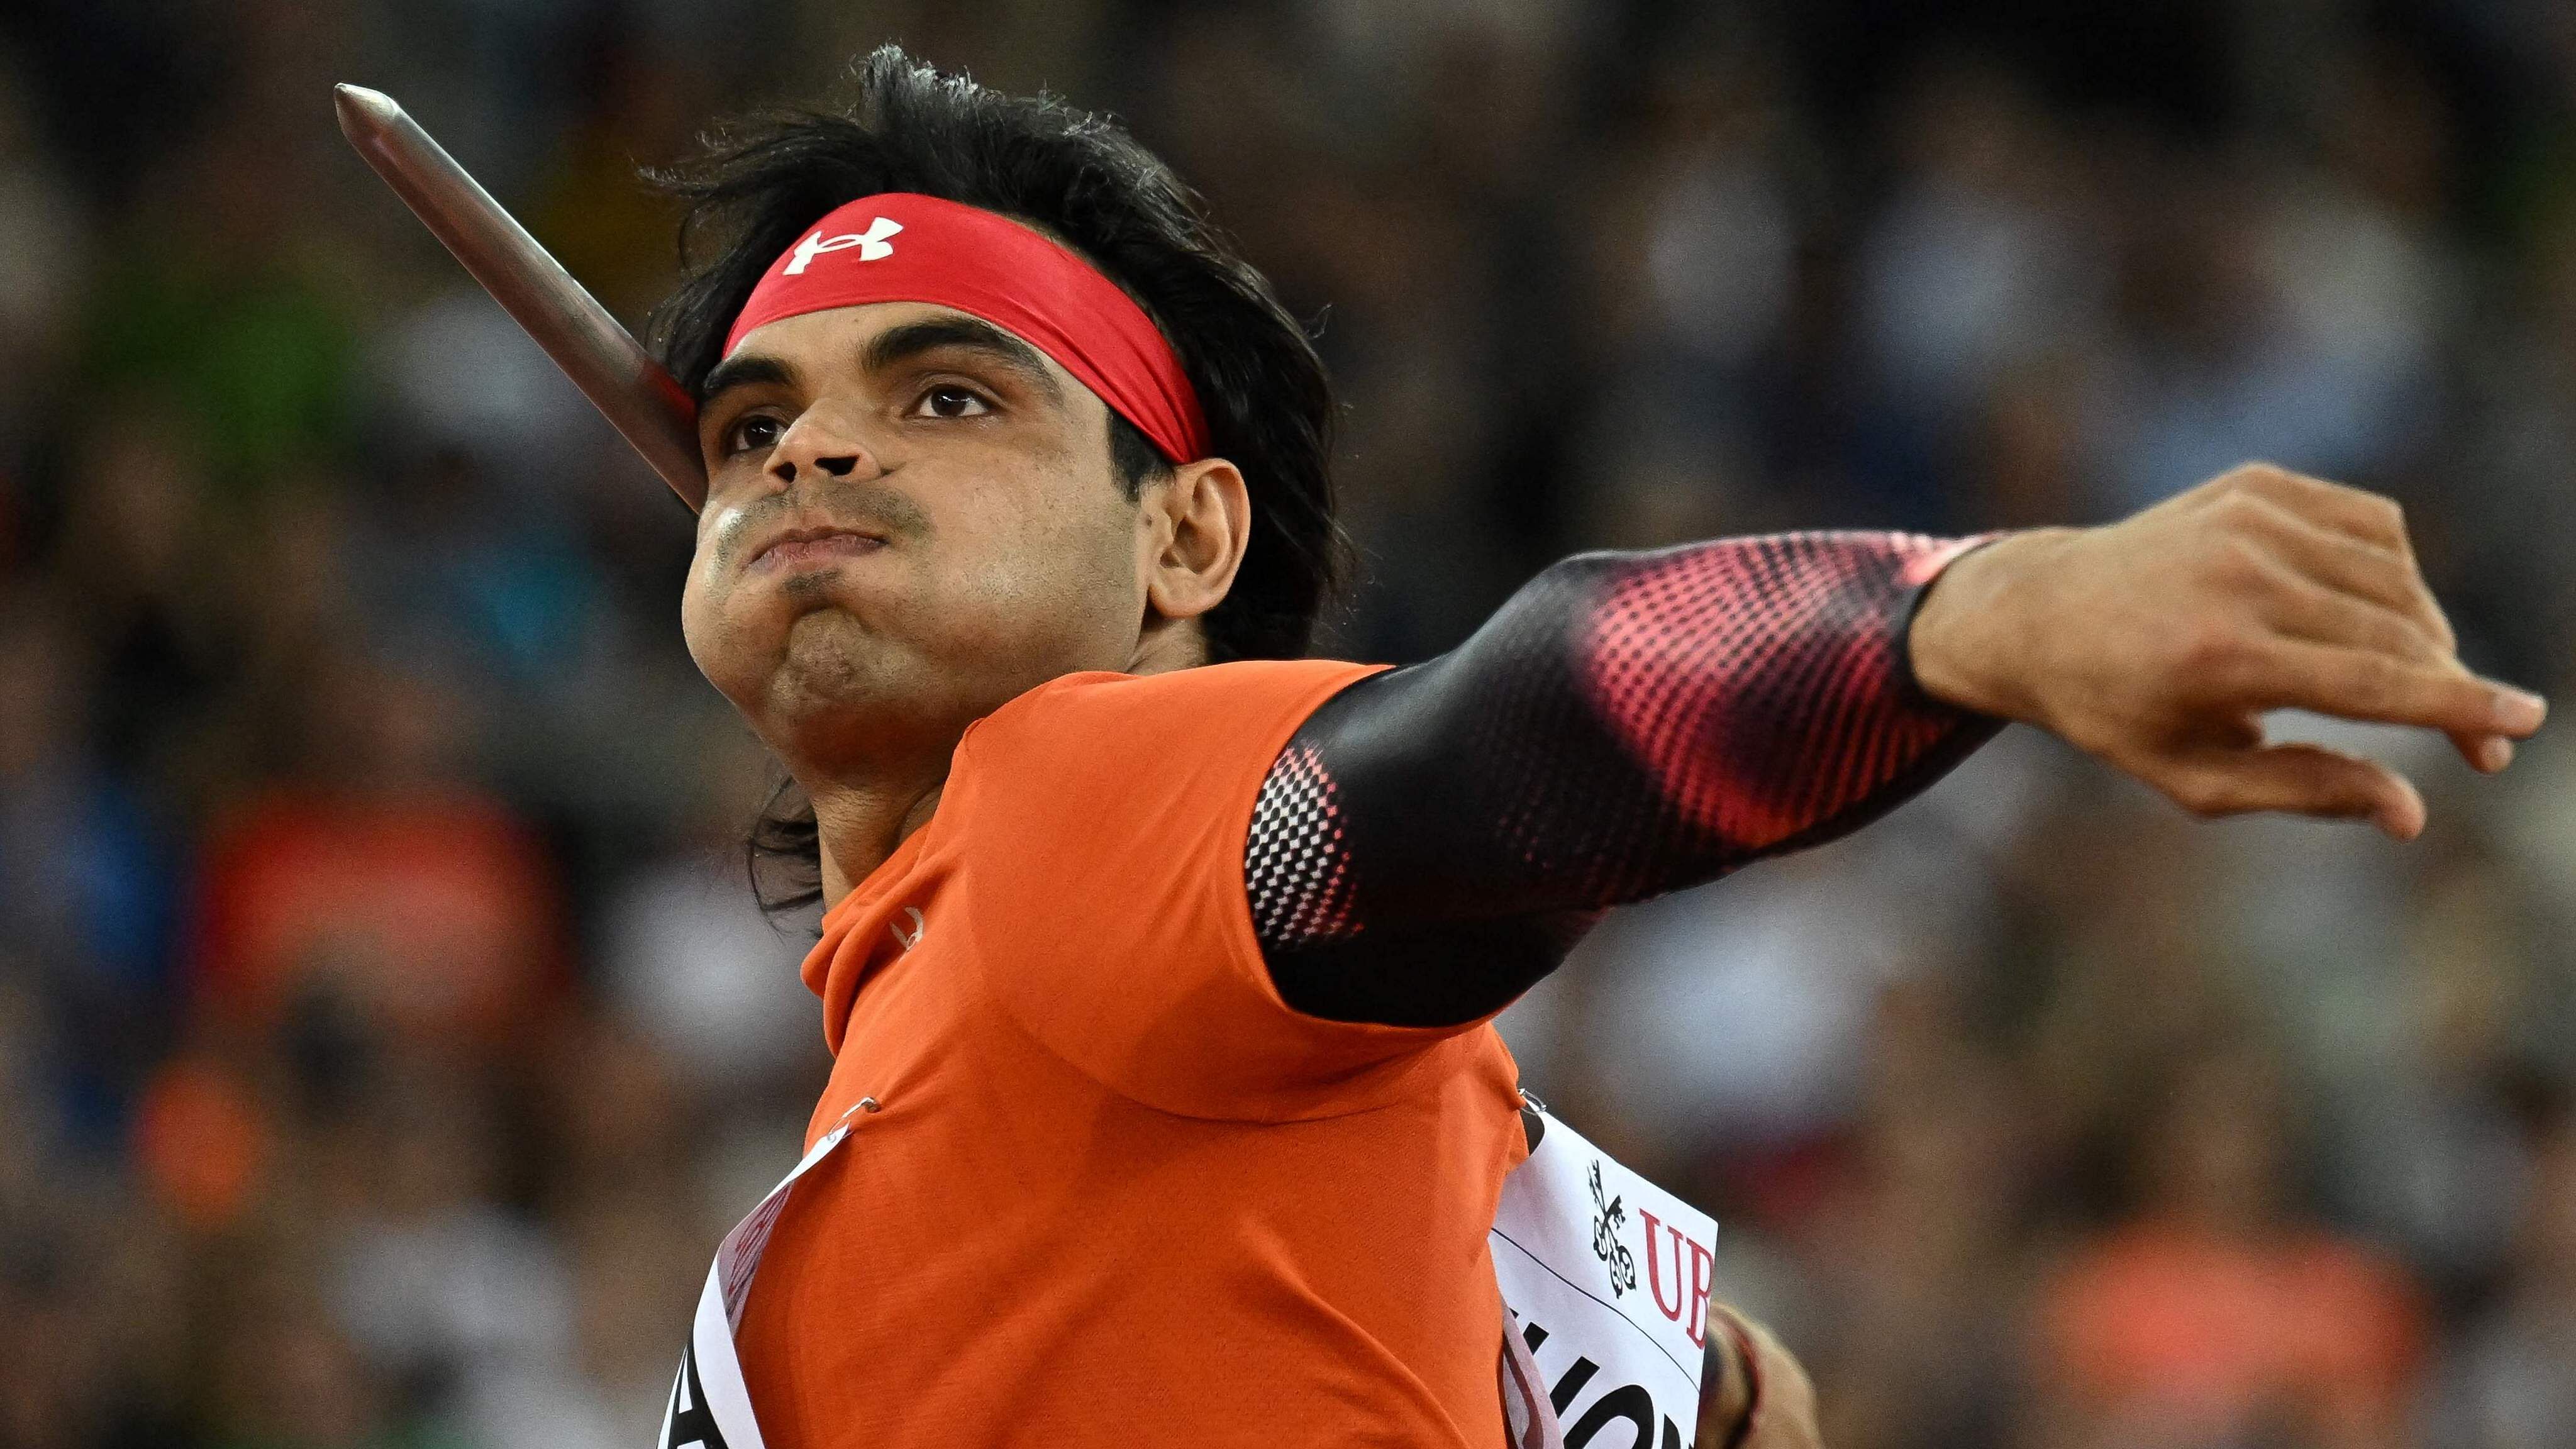 The much-coveted 90m mark eluded the Olympic champion but the legend of Neeraj Chopra kept growing with podium finishes at elite tournaments. Credit: AFP Photo